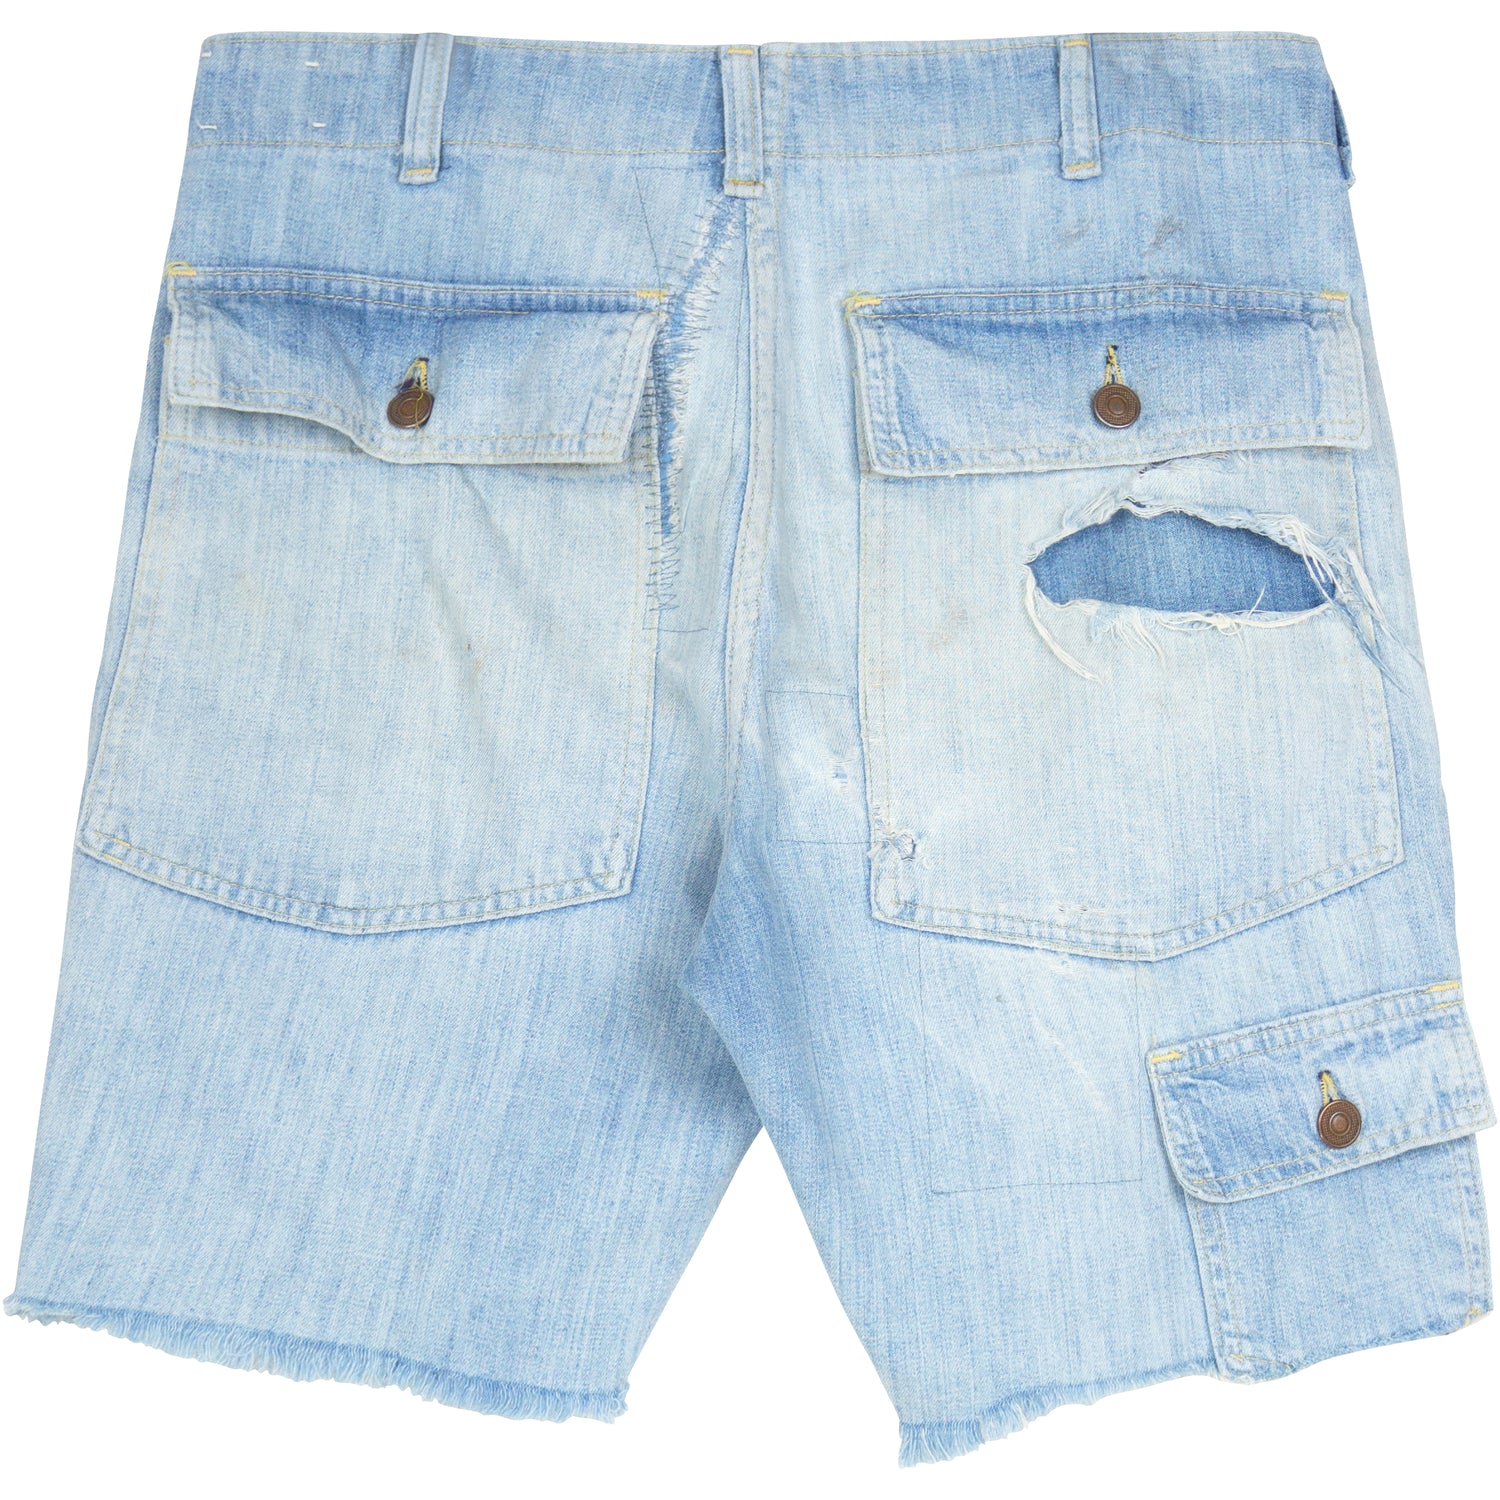 VINTAGE FADED CUT-OFF SHORTS - SIZE 31